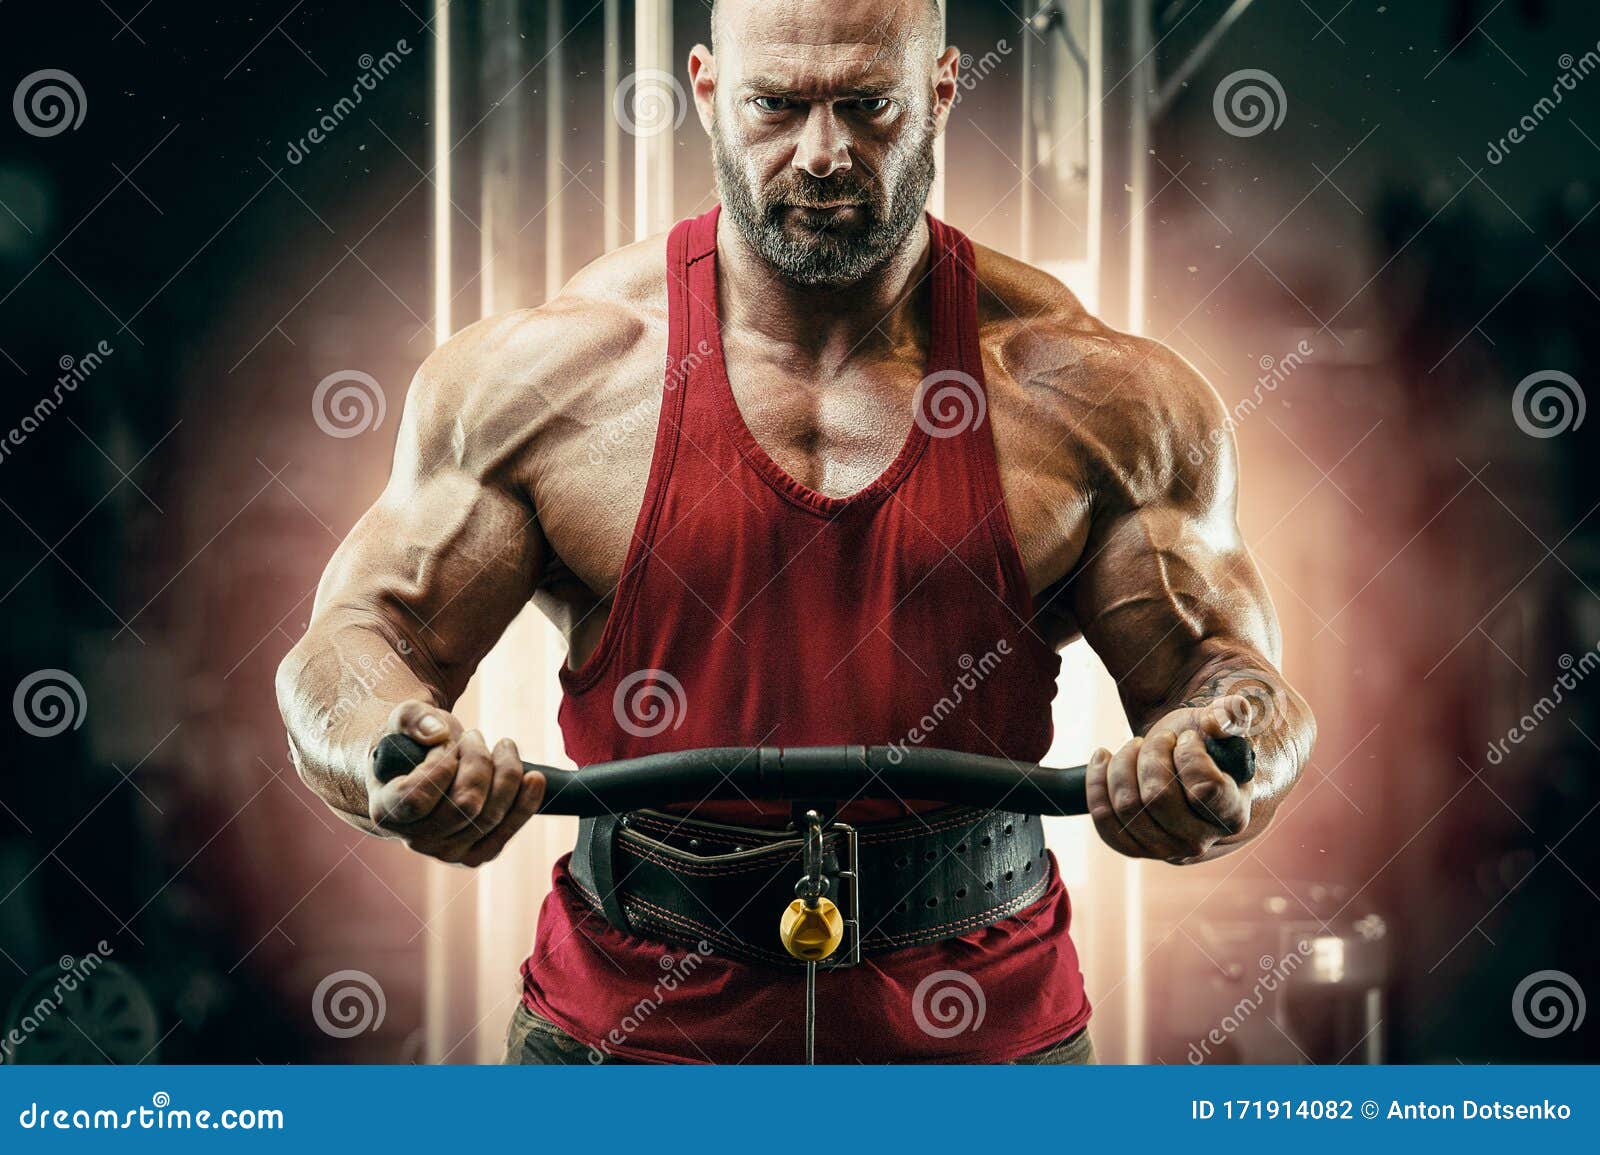 Healthy Hot Male Showing Muscles With Fire Stock Image 